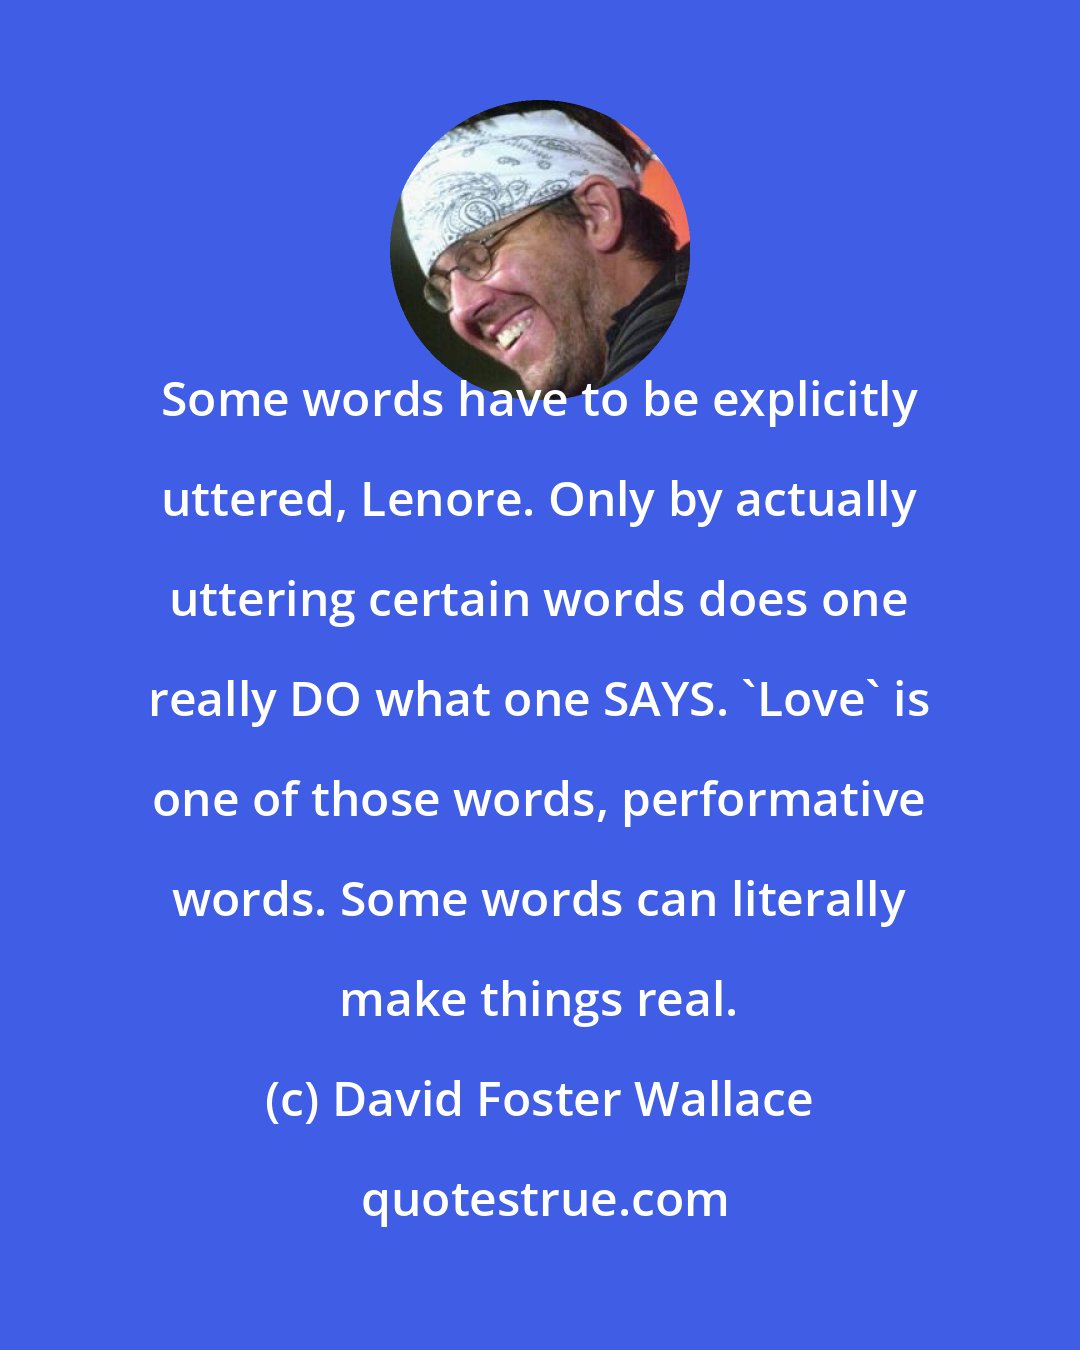 David Foster Wallace: Some words have to be explicitly uttered, Lenore. Only by actually uttering certain words does one really DO what one SAYS. 'Love' is one of those words, performative words. Some words can literally make things real.